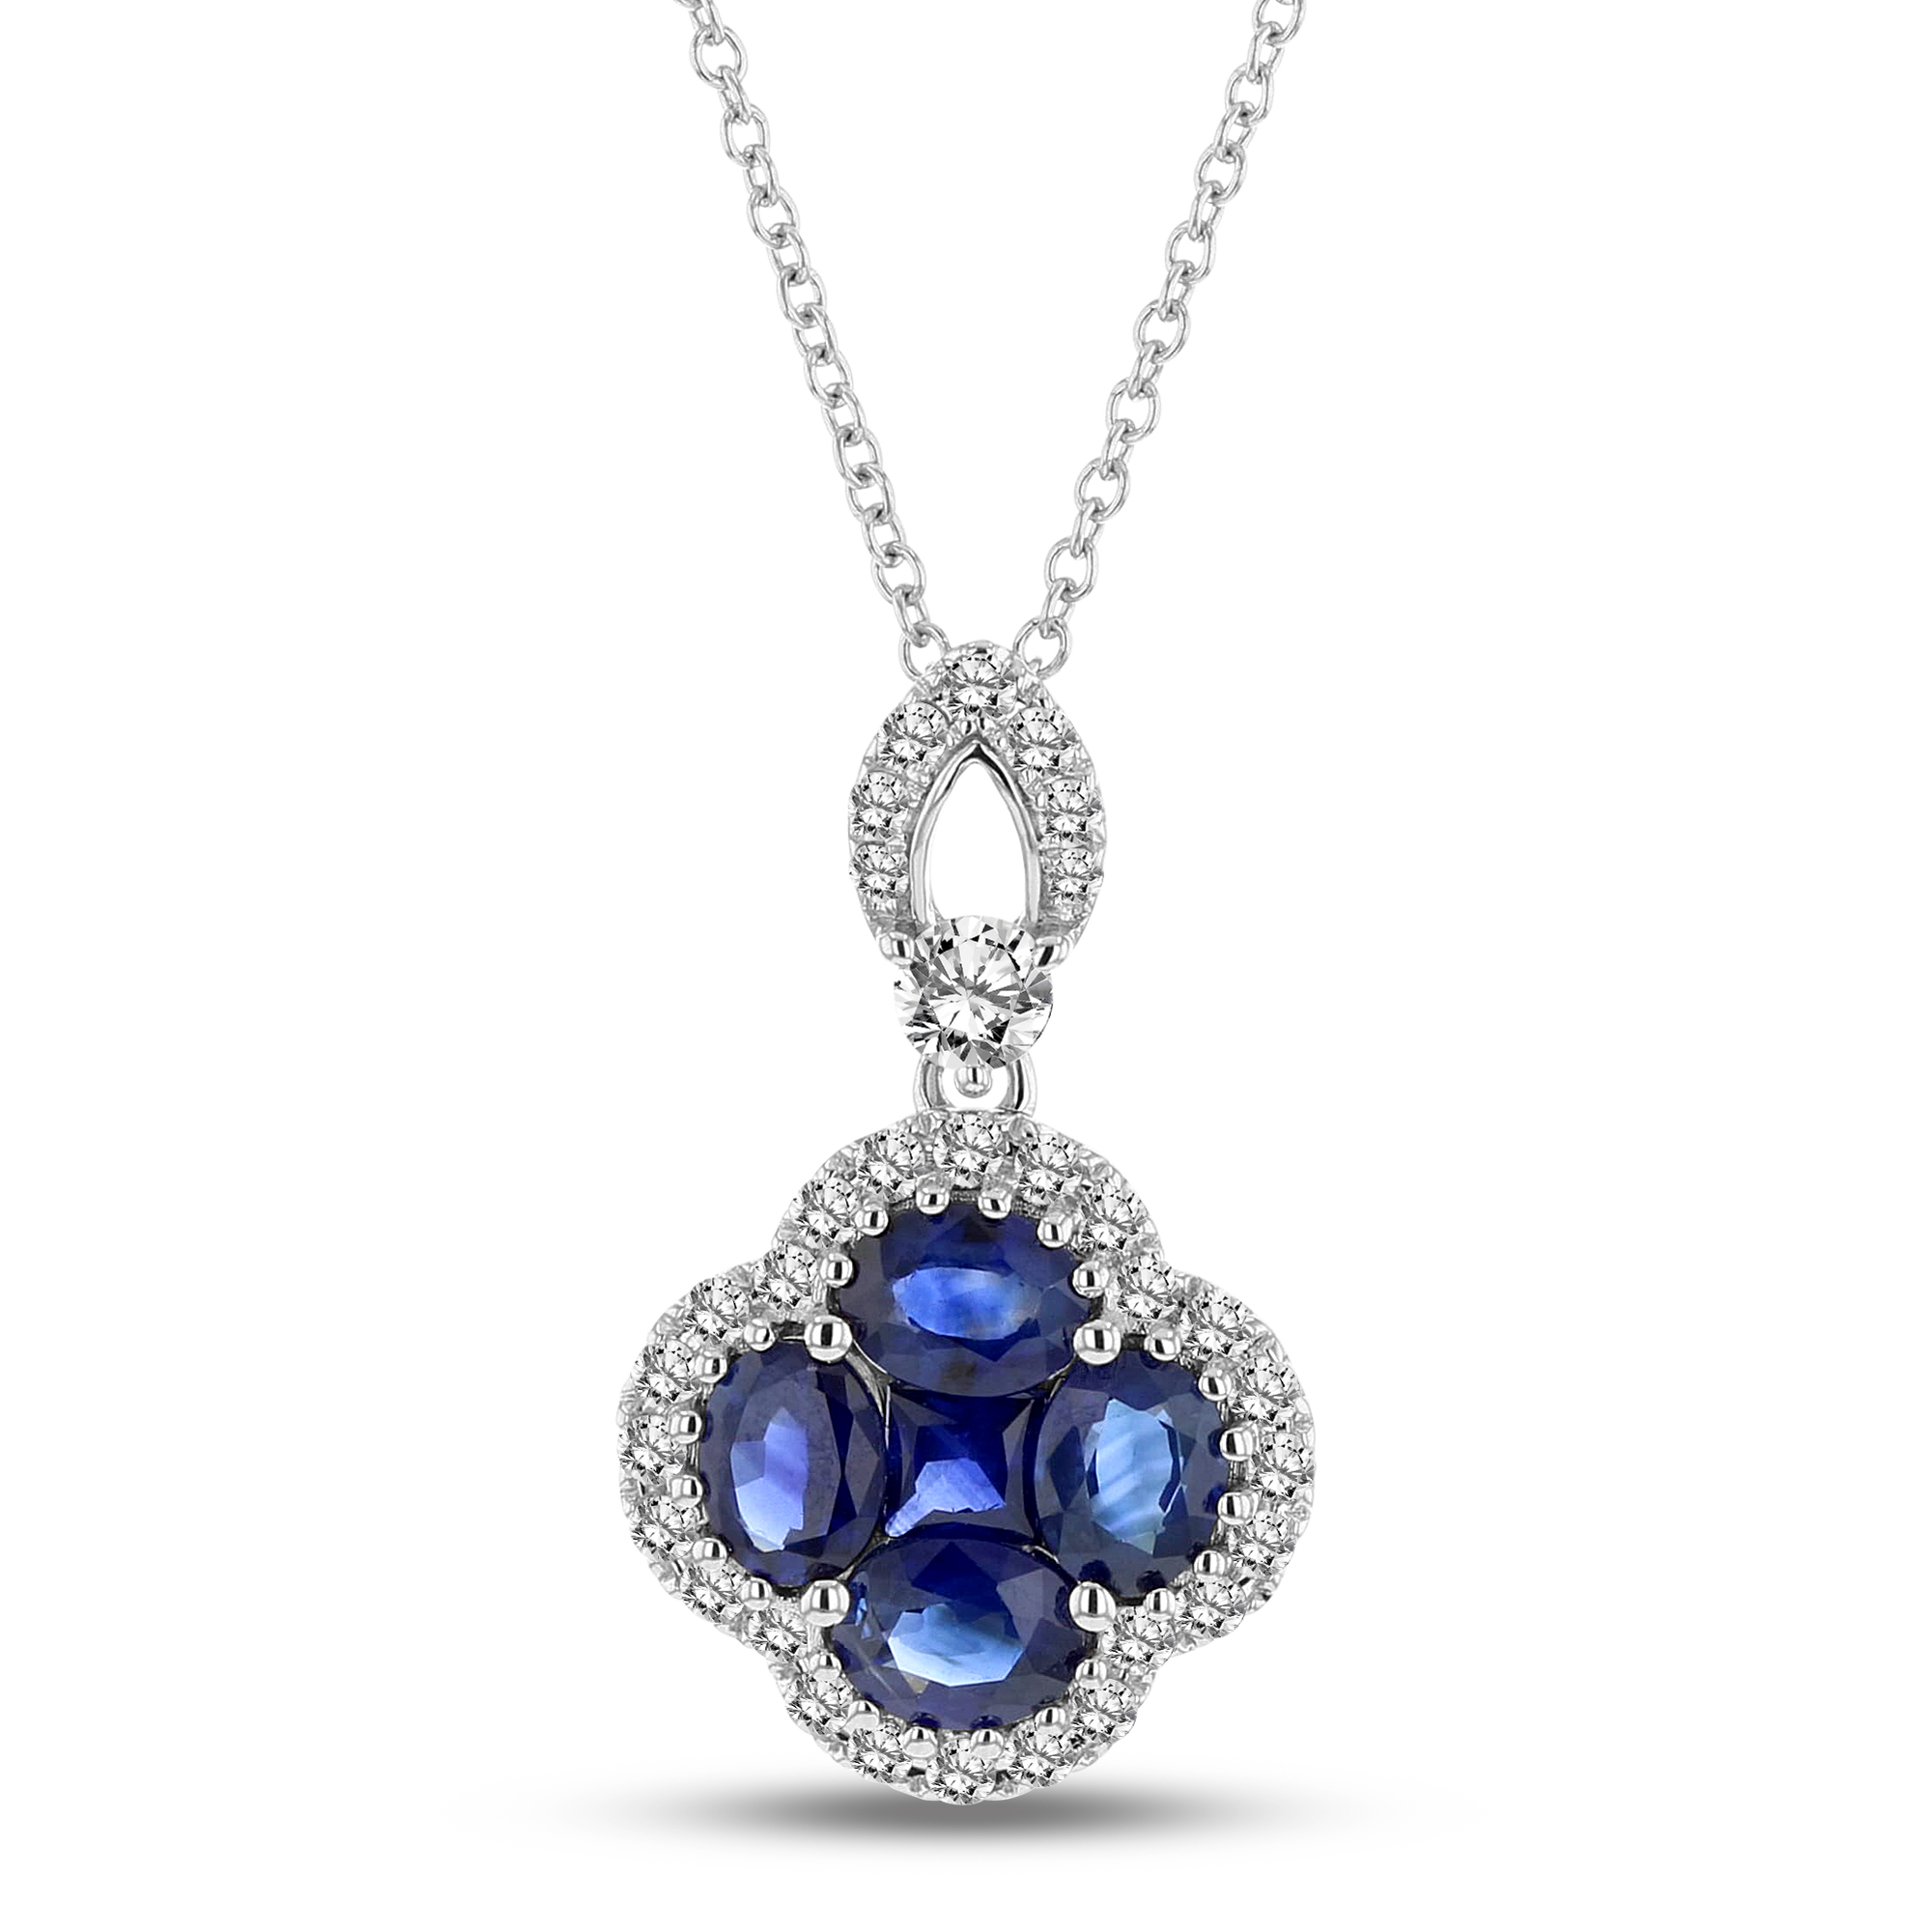 View 0.33ctw Diamond and Sapphire Clover Pendant in 18k White Gold